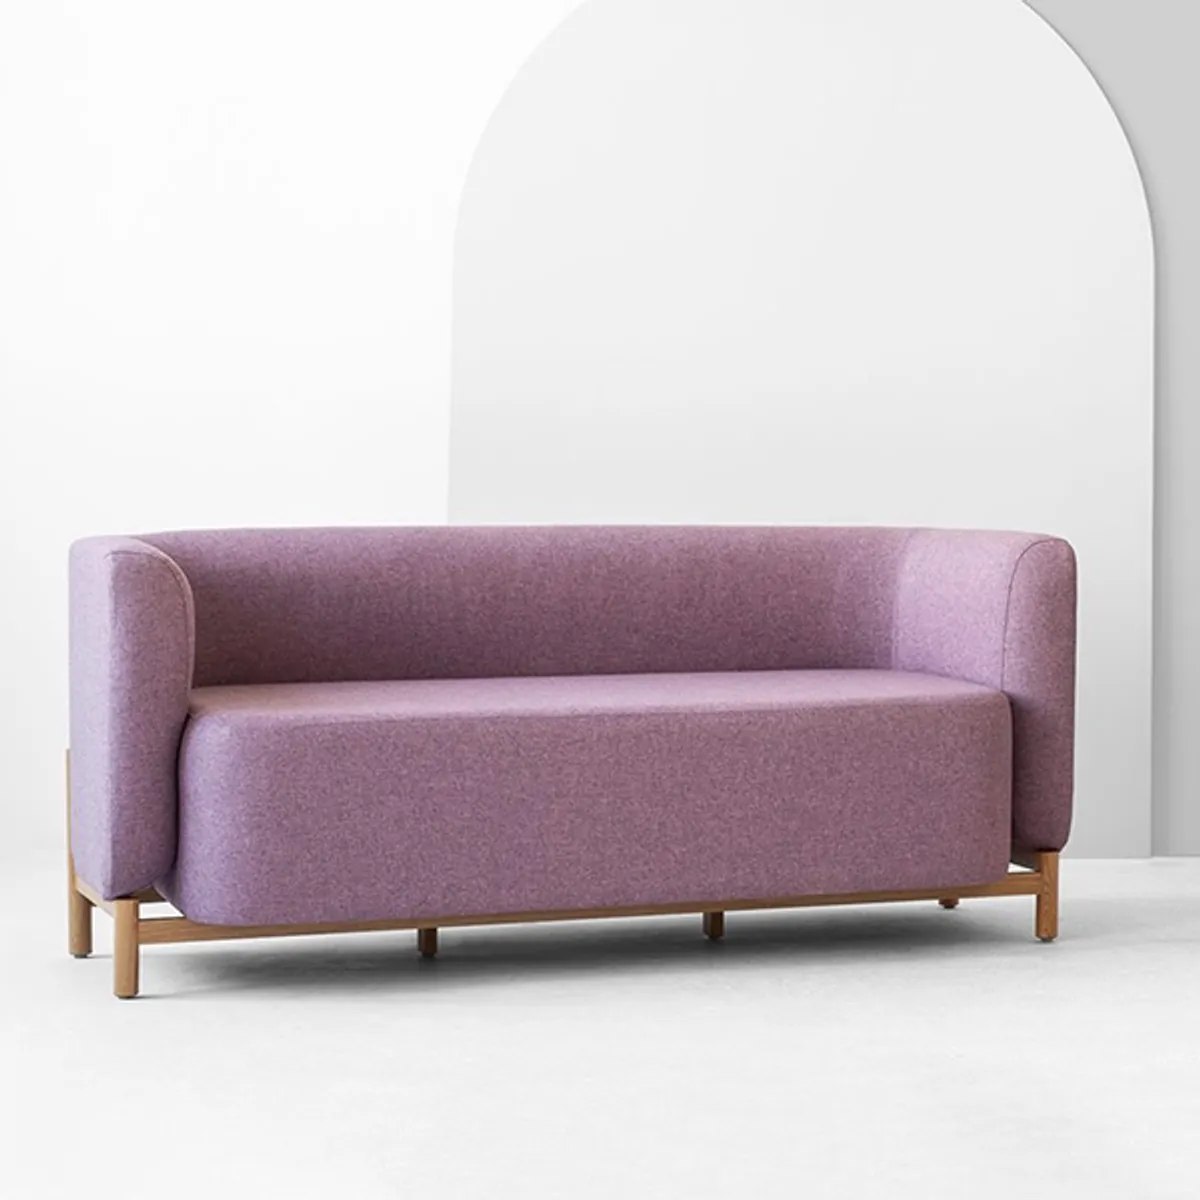 Roberta Sofa Upholstered Hotel Furniture With Wooden Legs Insideoutcontracts